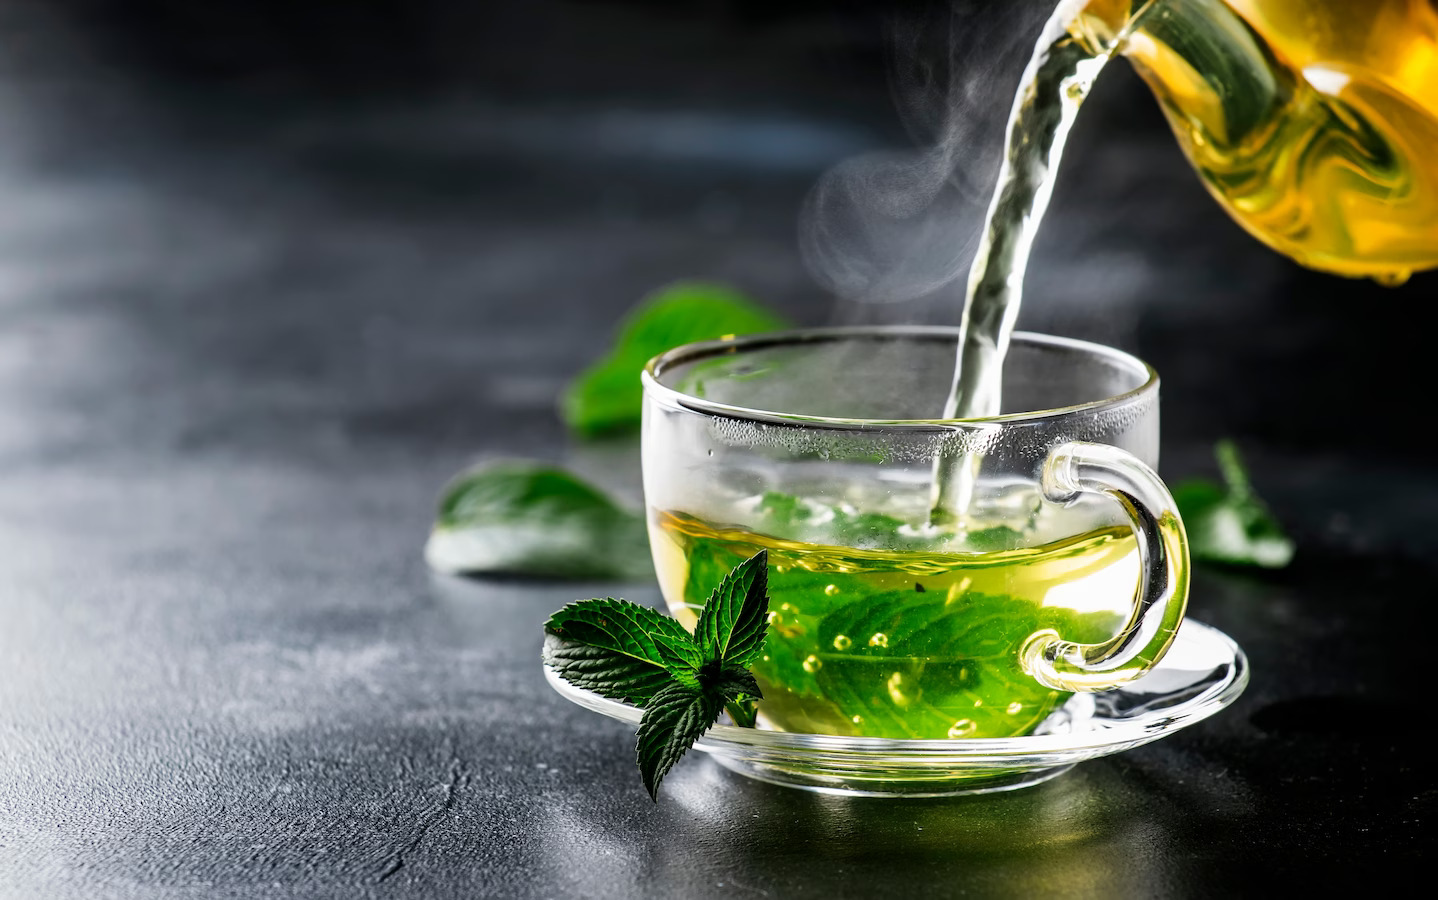 Drink-Green-Tea-Every-Day